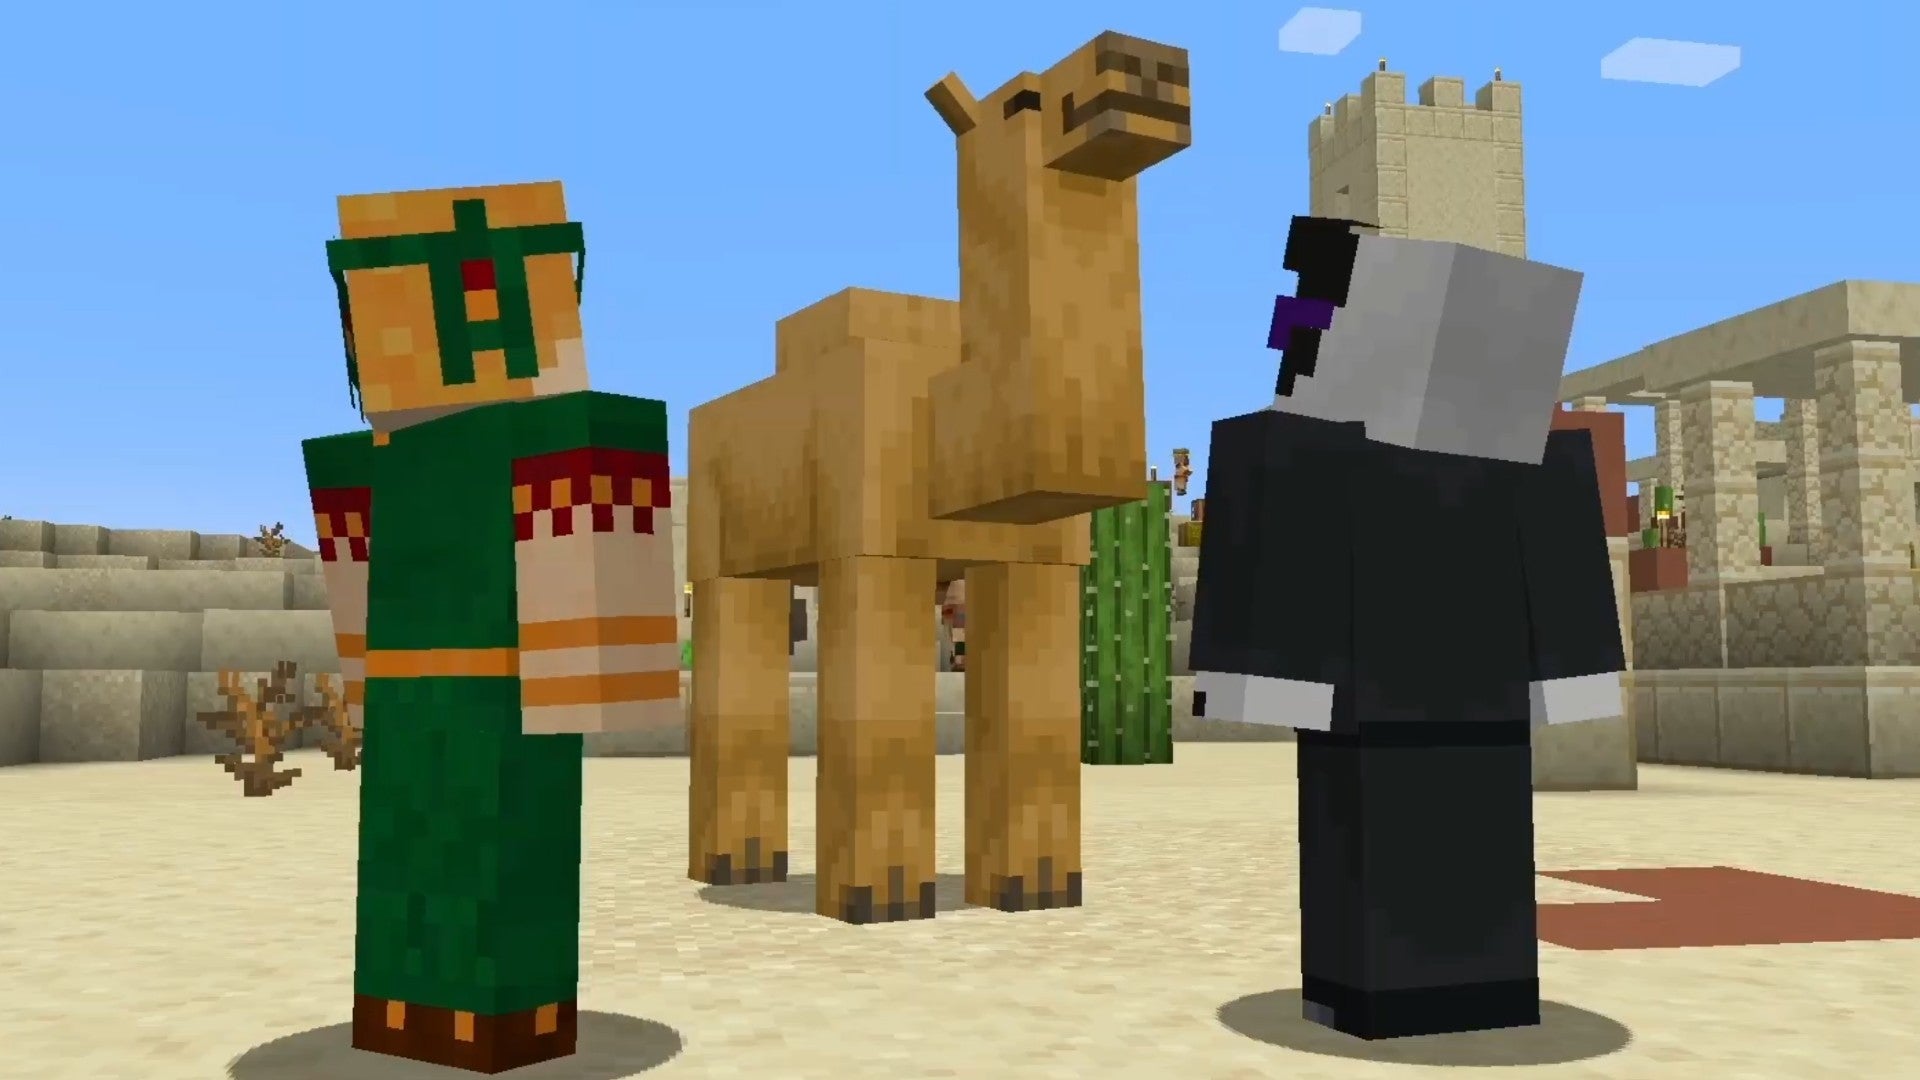 Two players staring at a camel in a desert village in Minecraft